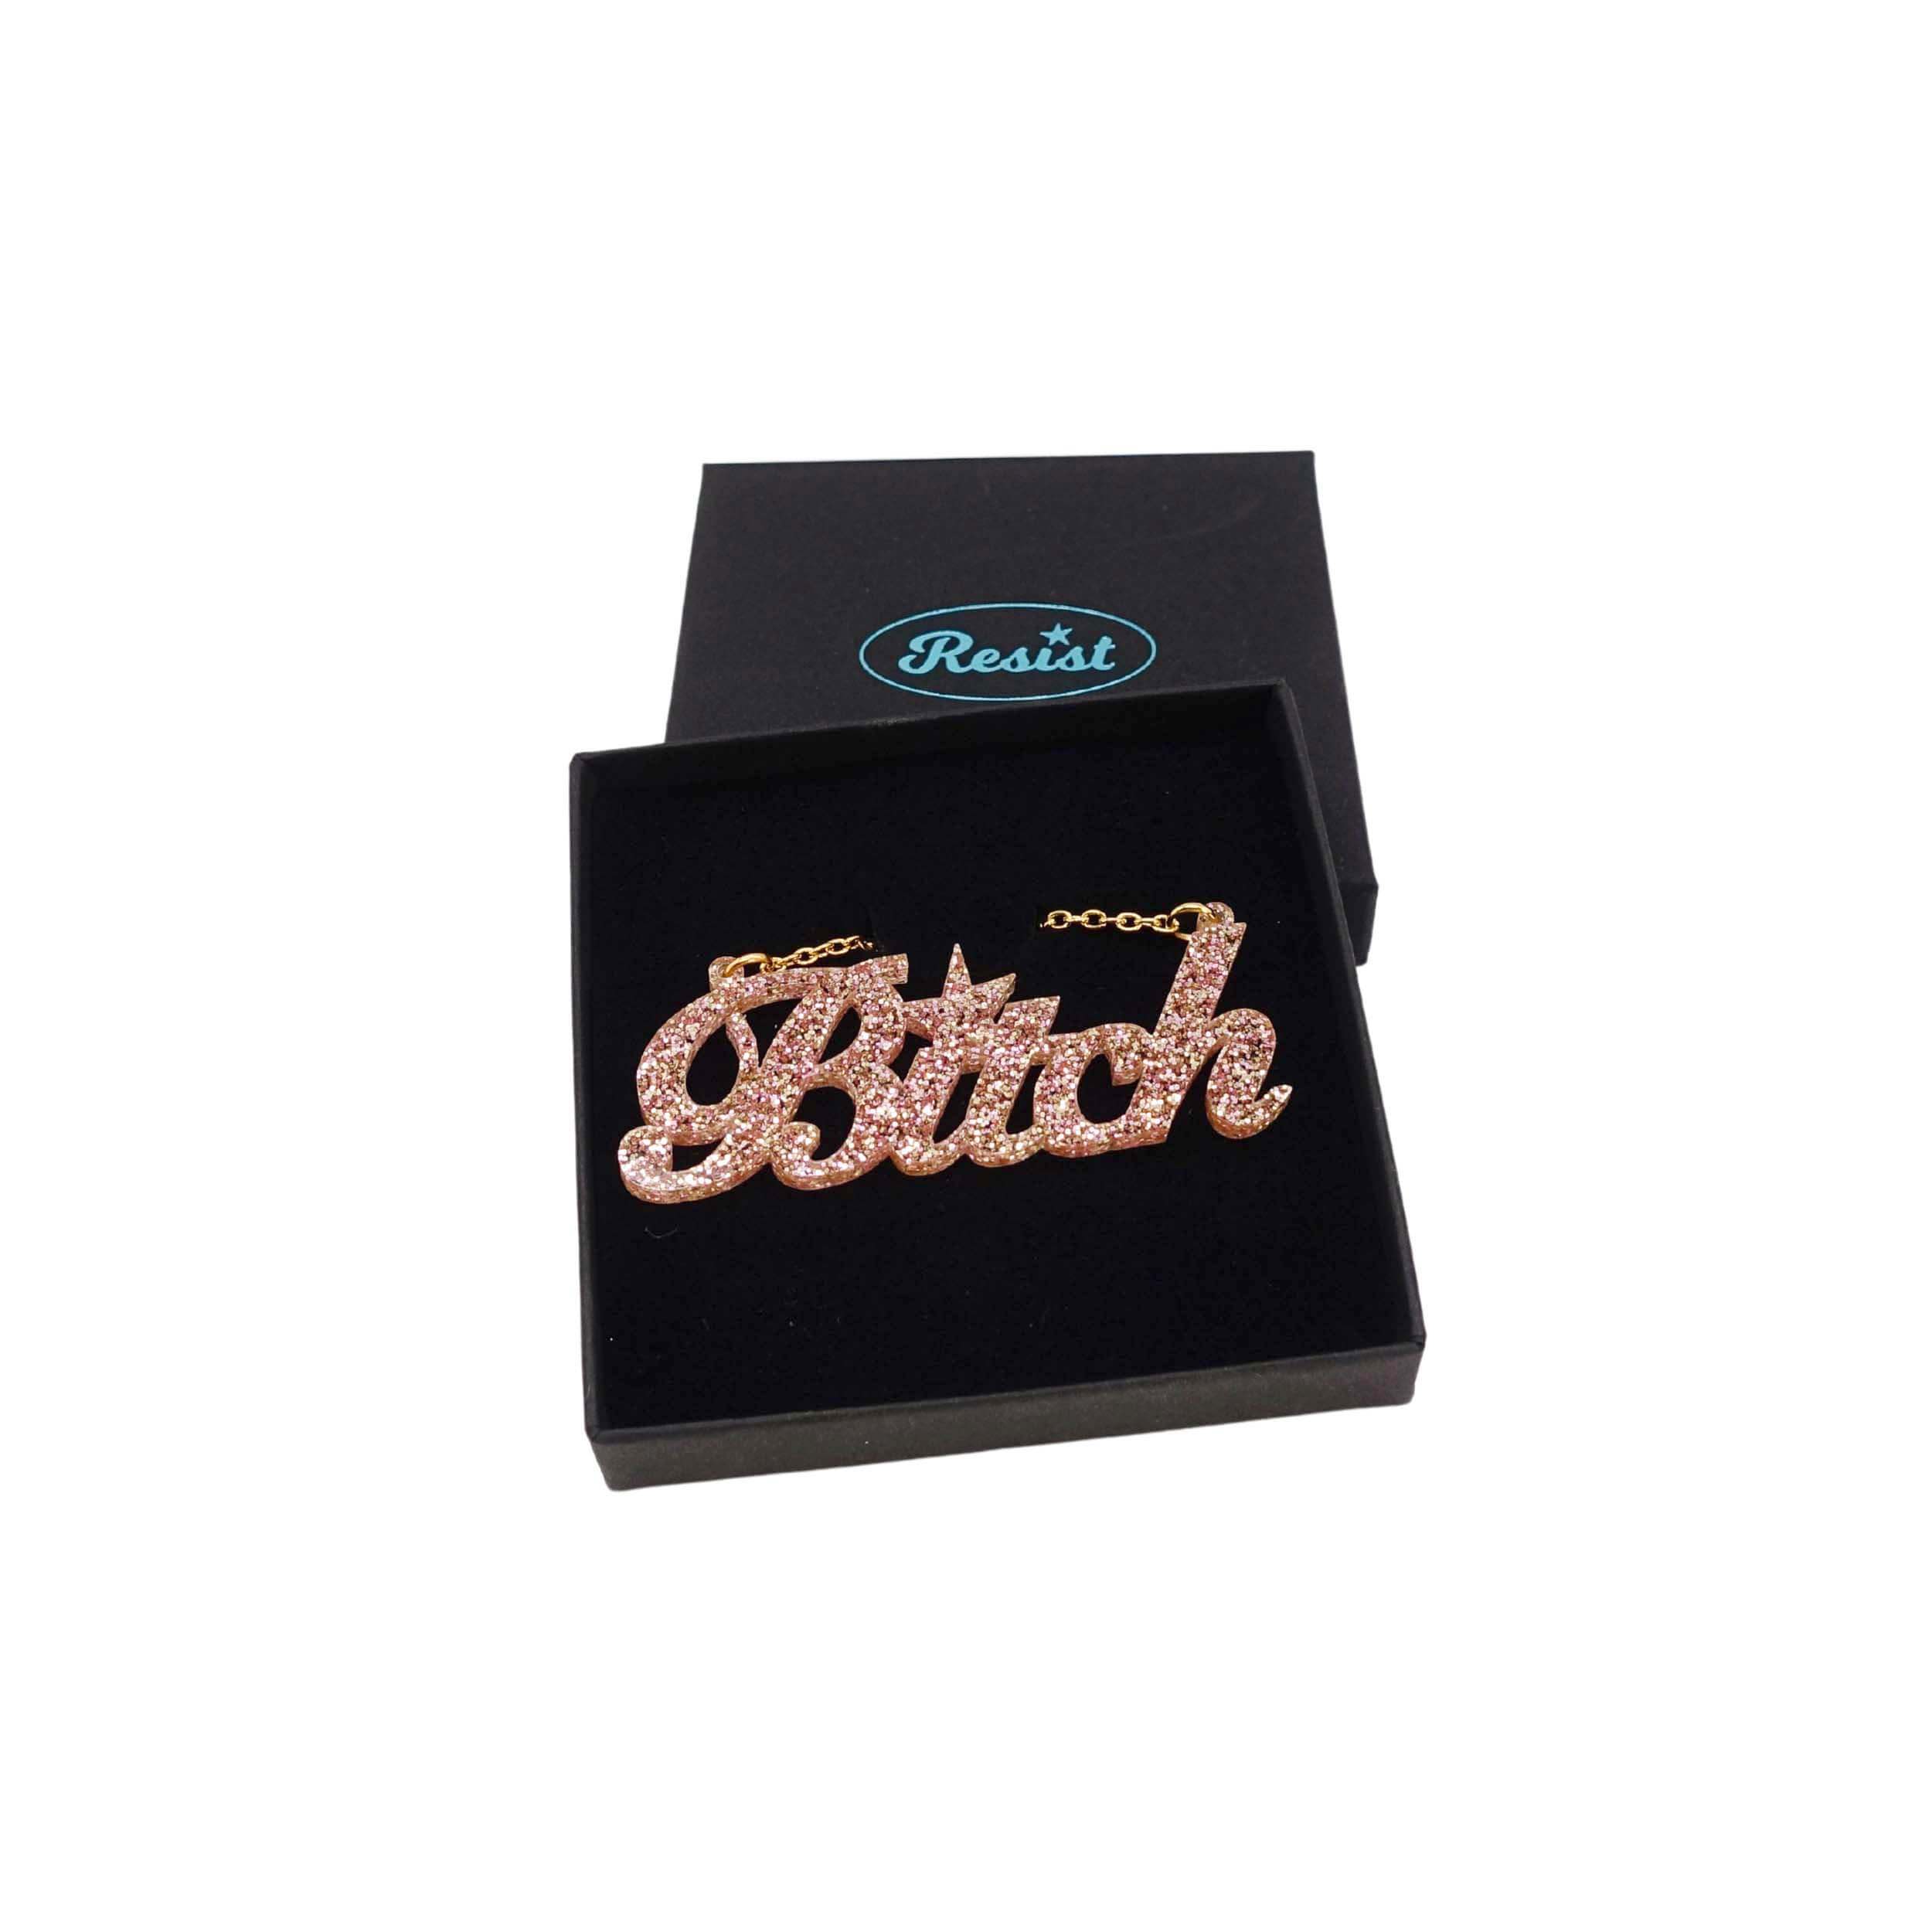 B*tch necklace in pink fizz glitter, shown in a Wear and Resist gift box. £2 goes to Bloody Good Period. 